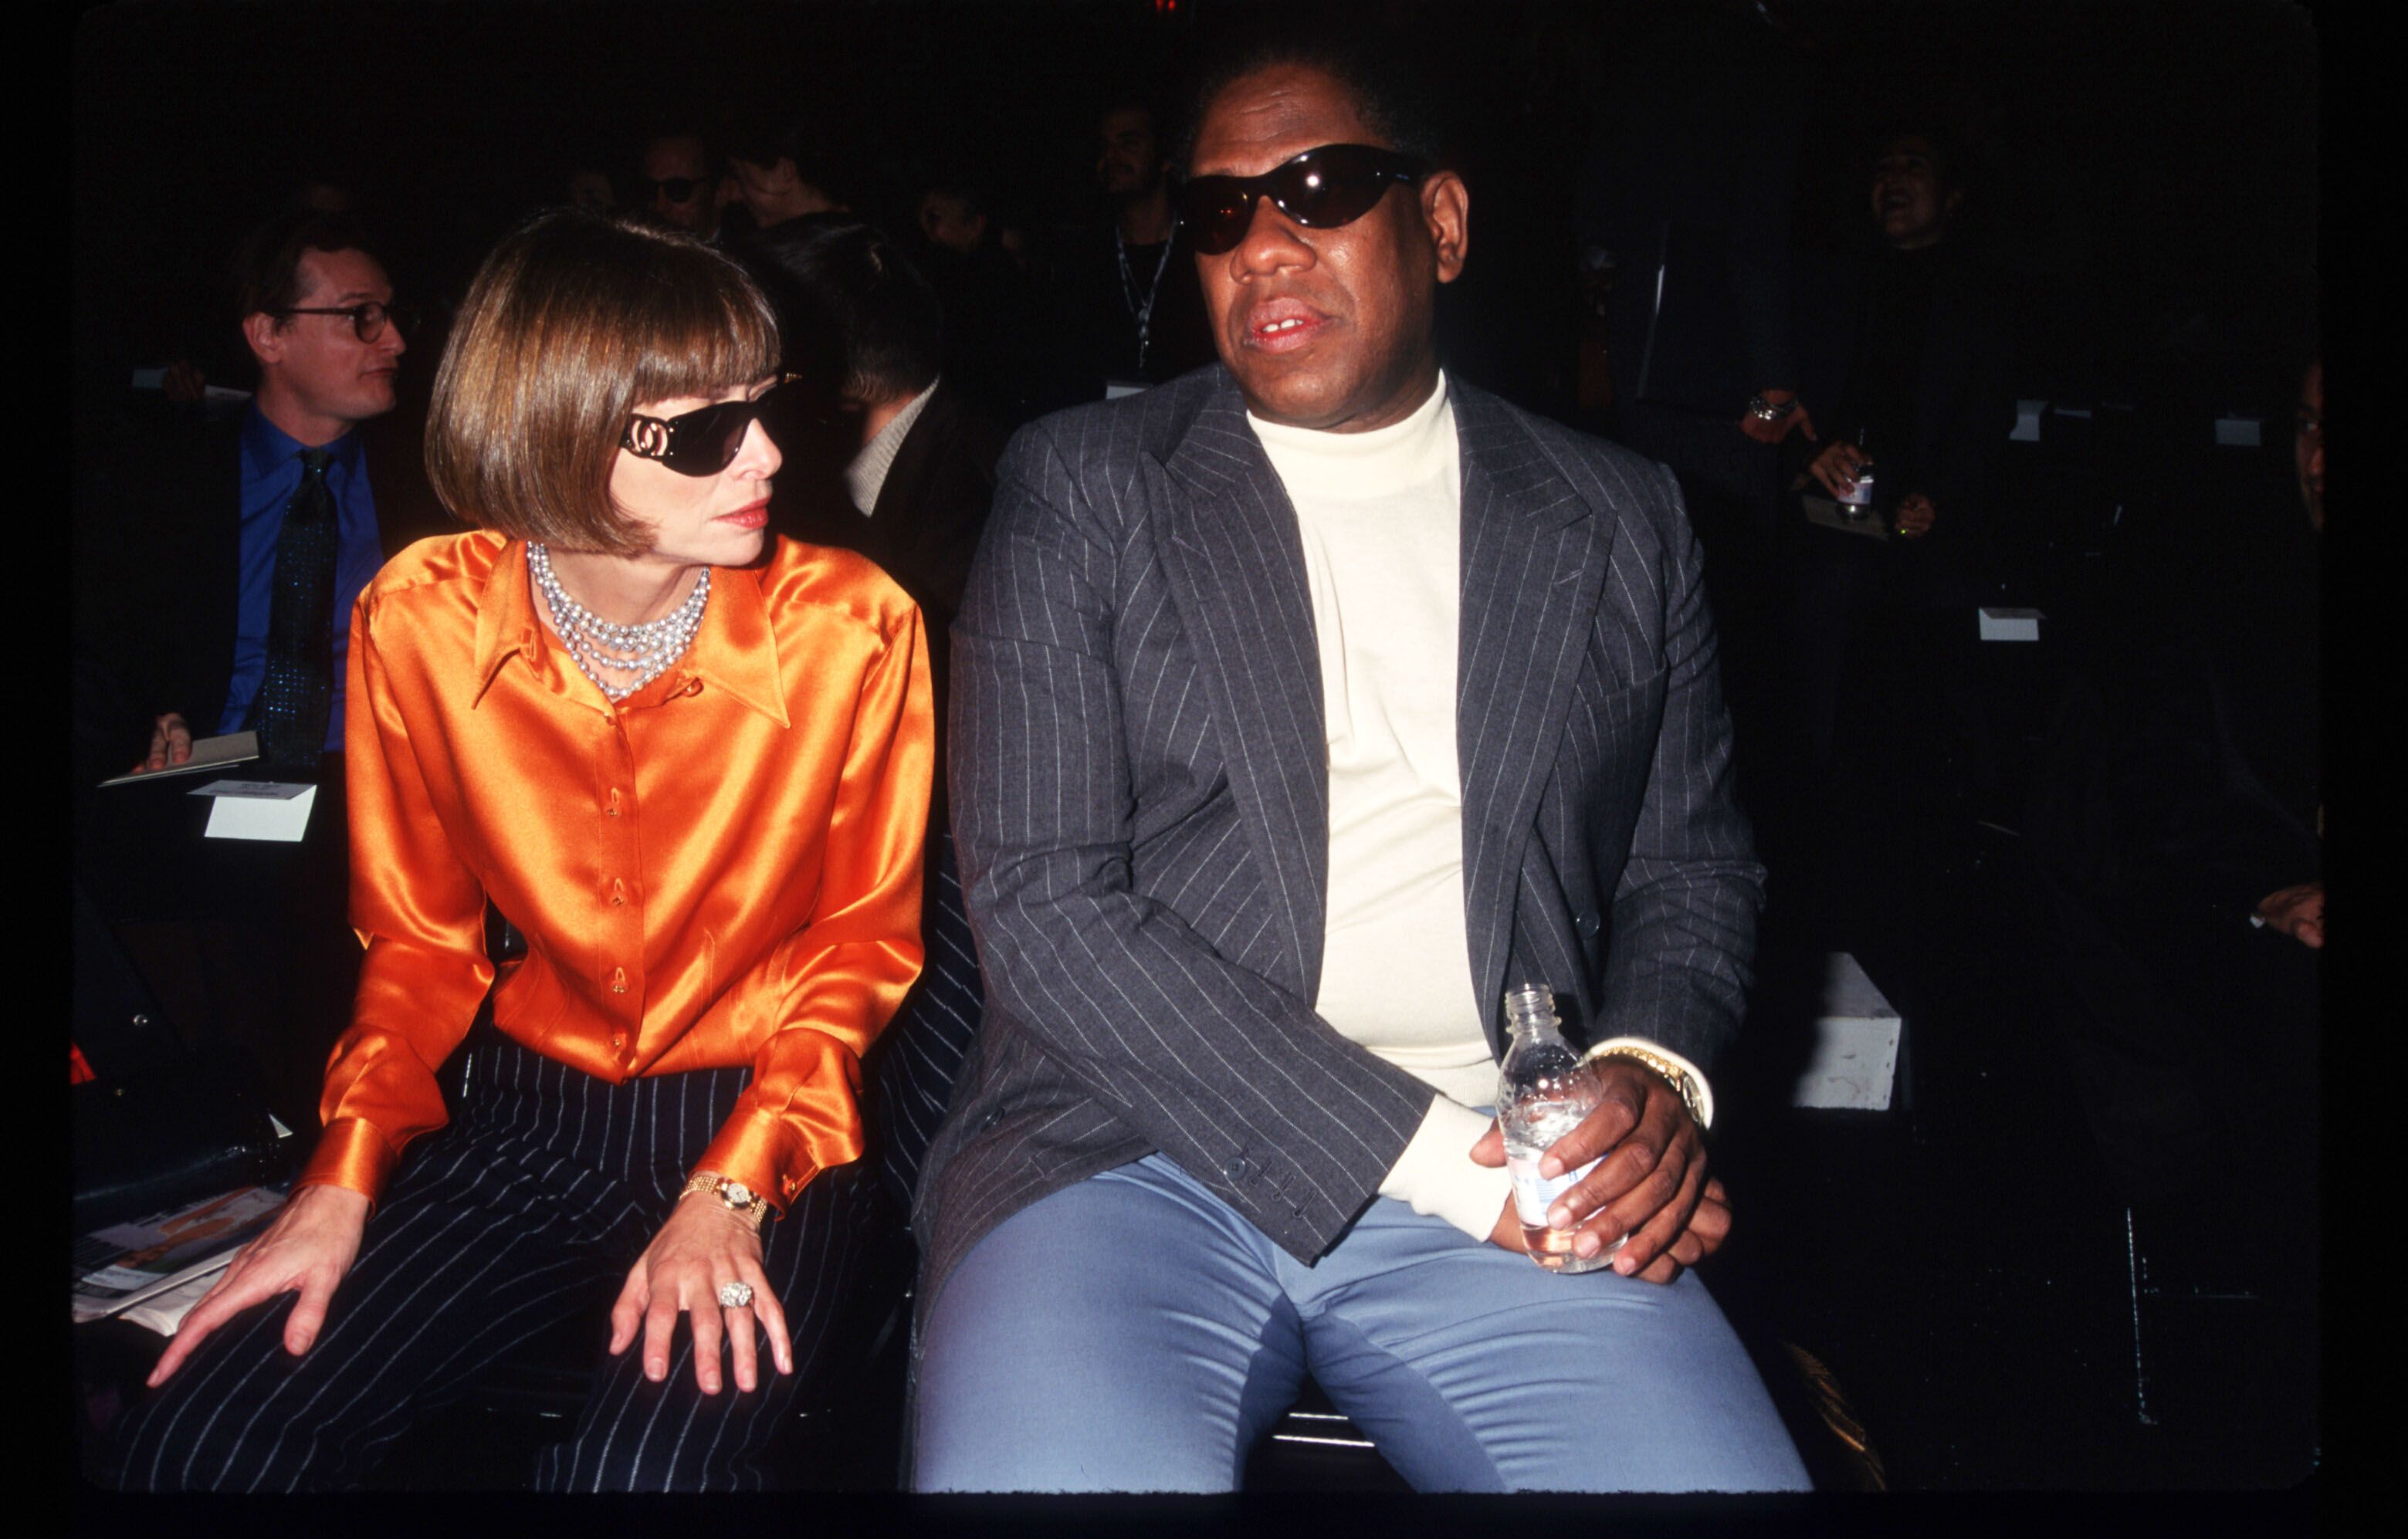 Andre Leon Talley death: Vogue director, fashion icon's life in photos